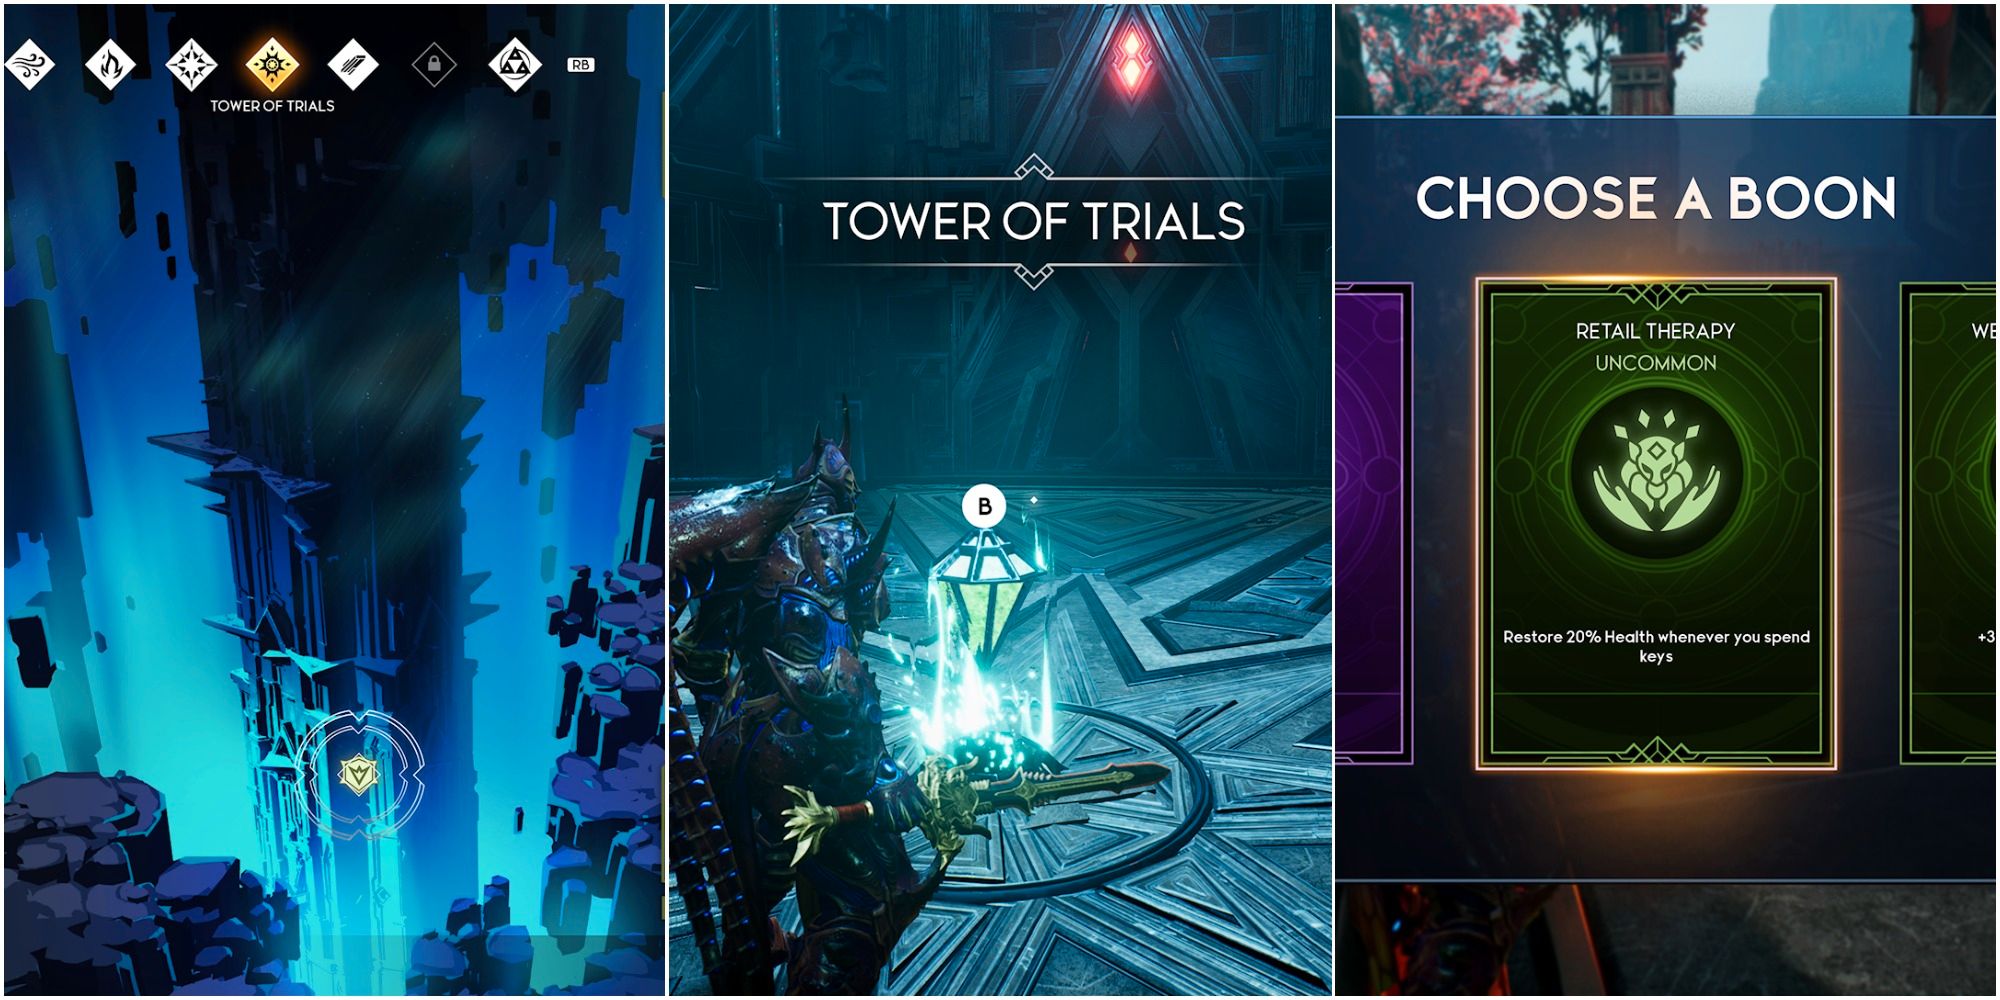 Godfall collage of tower of trials map, tower of trials main chamber, and tower of trials boon reward